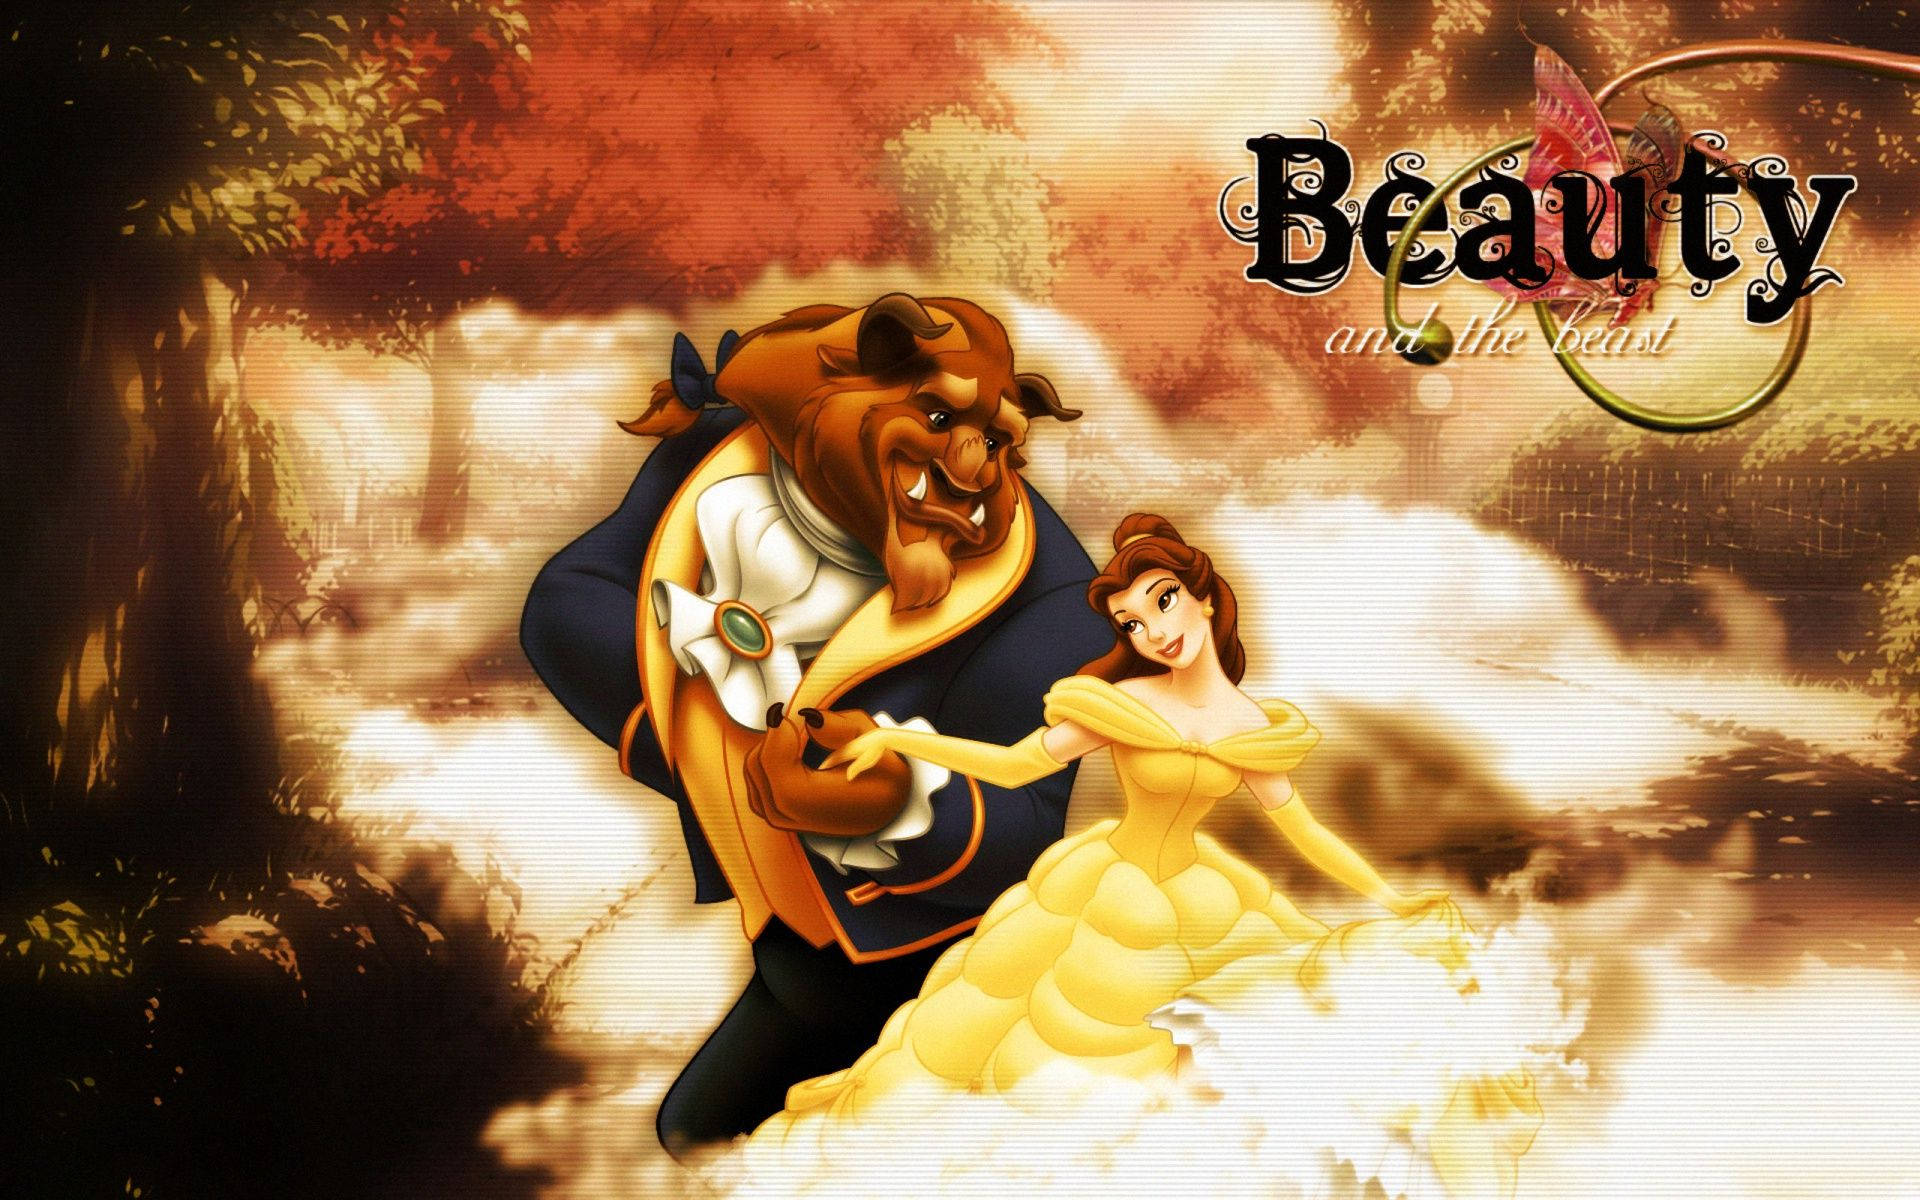 beauty and the beast wallpaper aesthetic